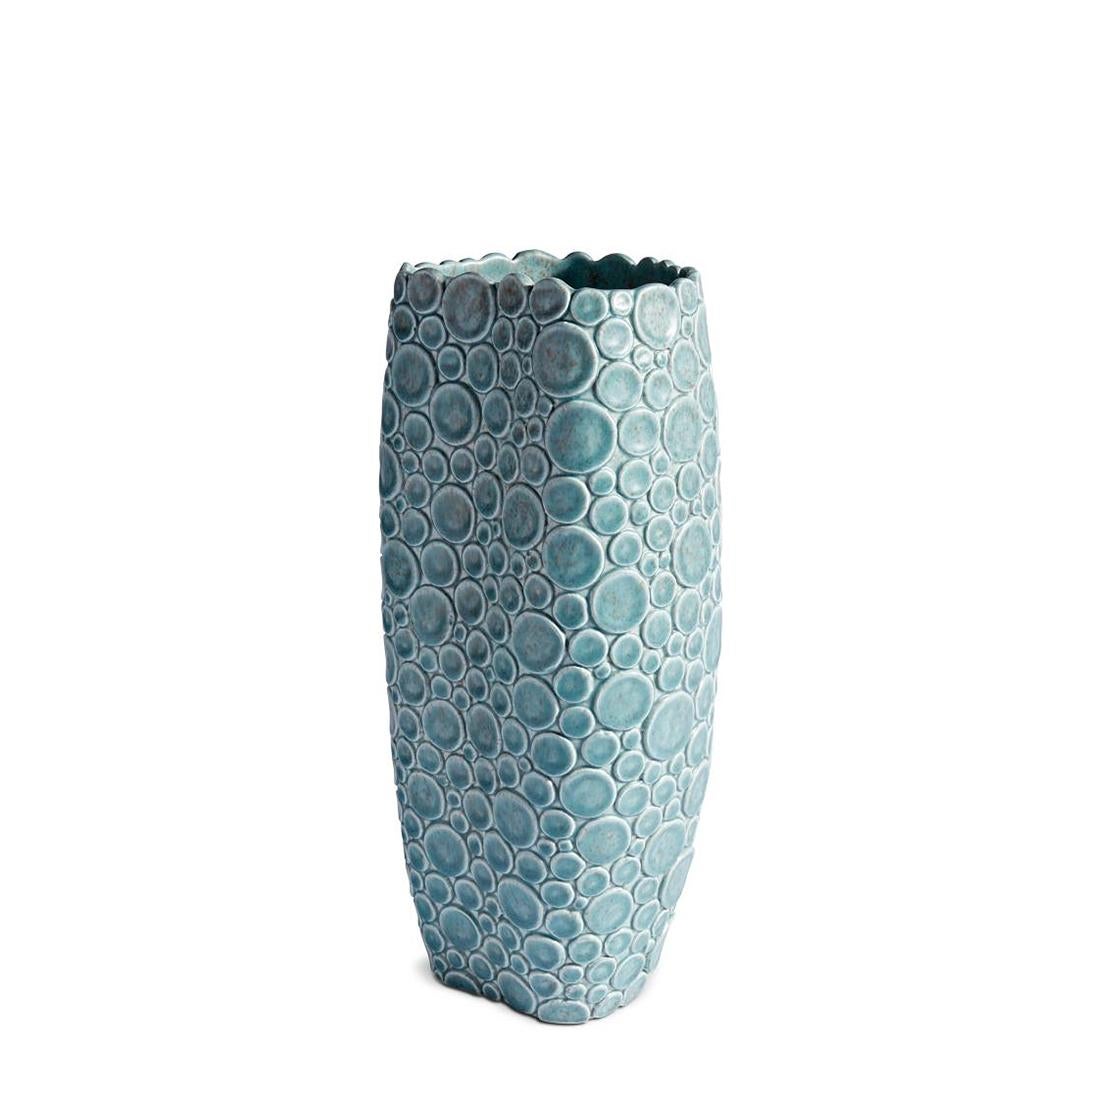 Vase clear jade in earthenware.
Also available in light pink color.